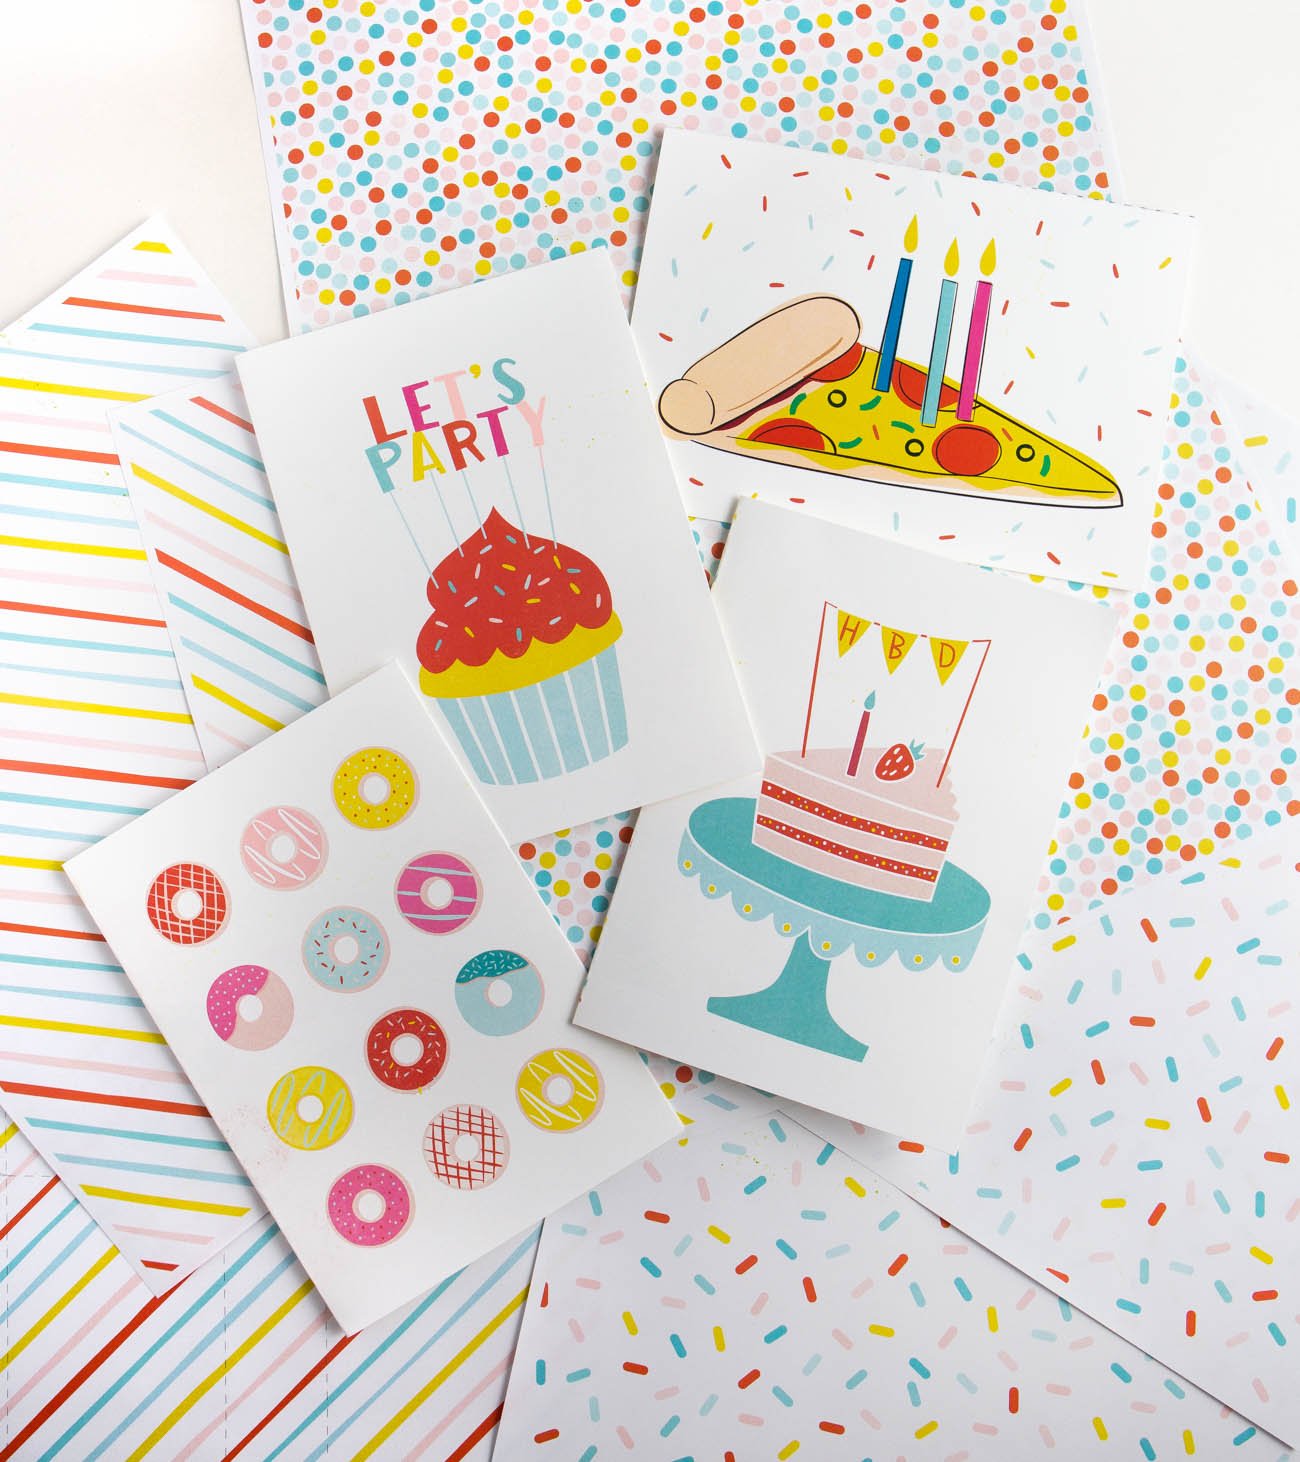 Four free printable birthday cards with donuts, cupcake let's party, pizza, and cake with HBD message